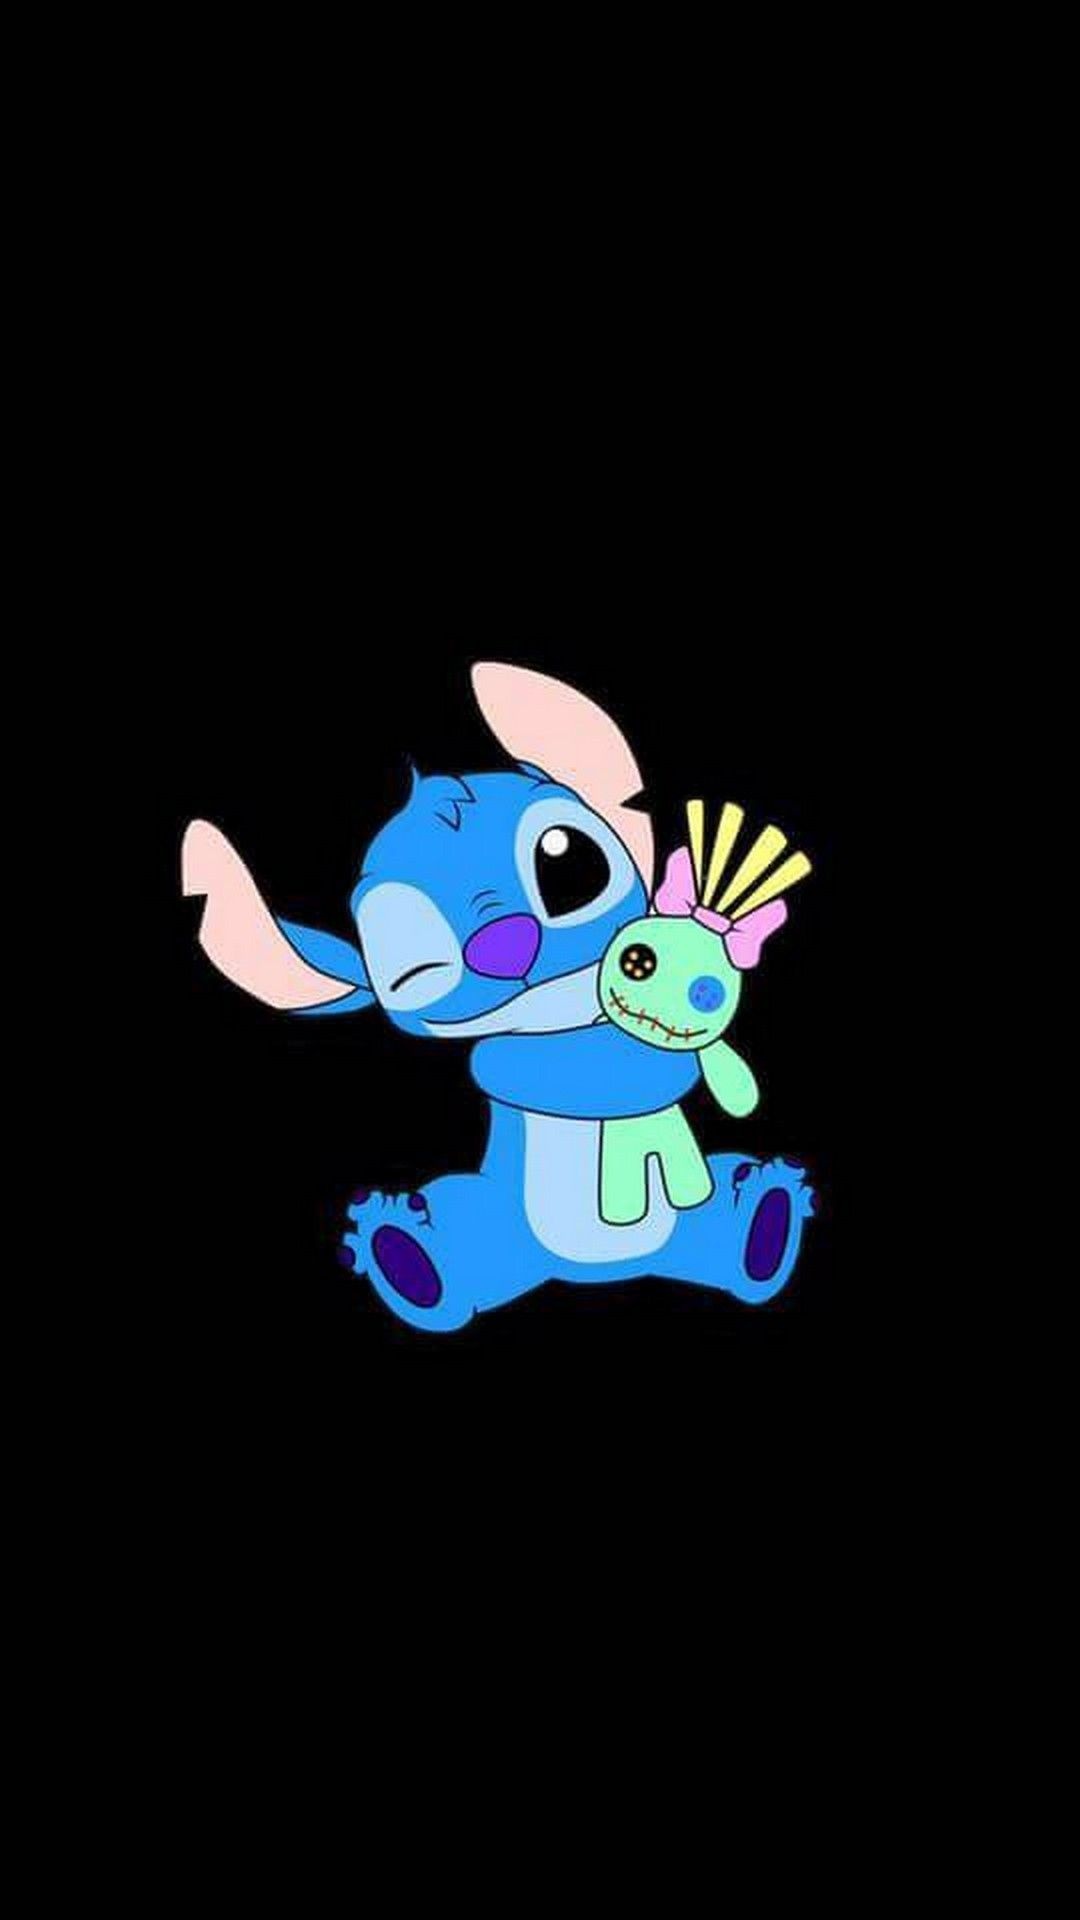 Lilo and Stitch: The Series, Stitch's HD wallpapers, Angel phone accessories, Disney iPhone wallpapers, 1080x1920 Full HD Handy